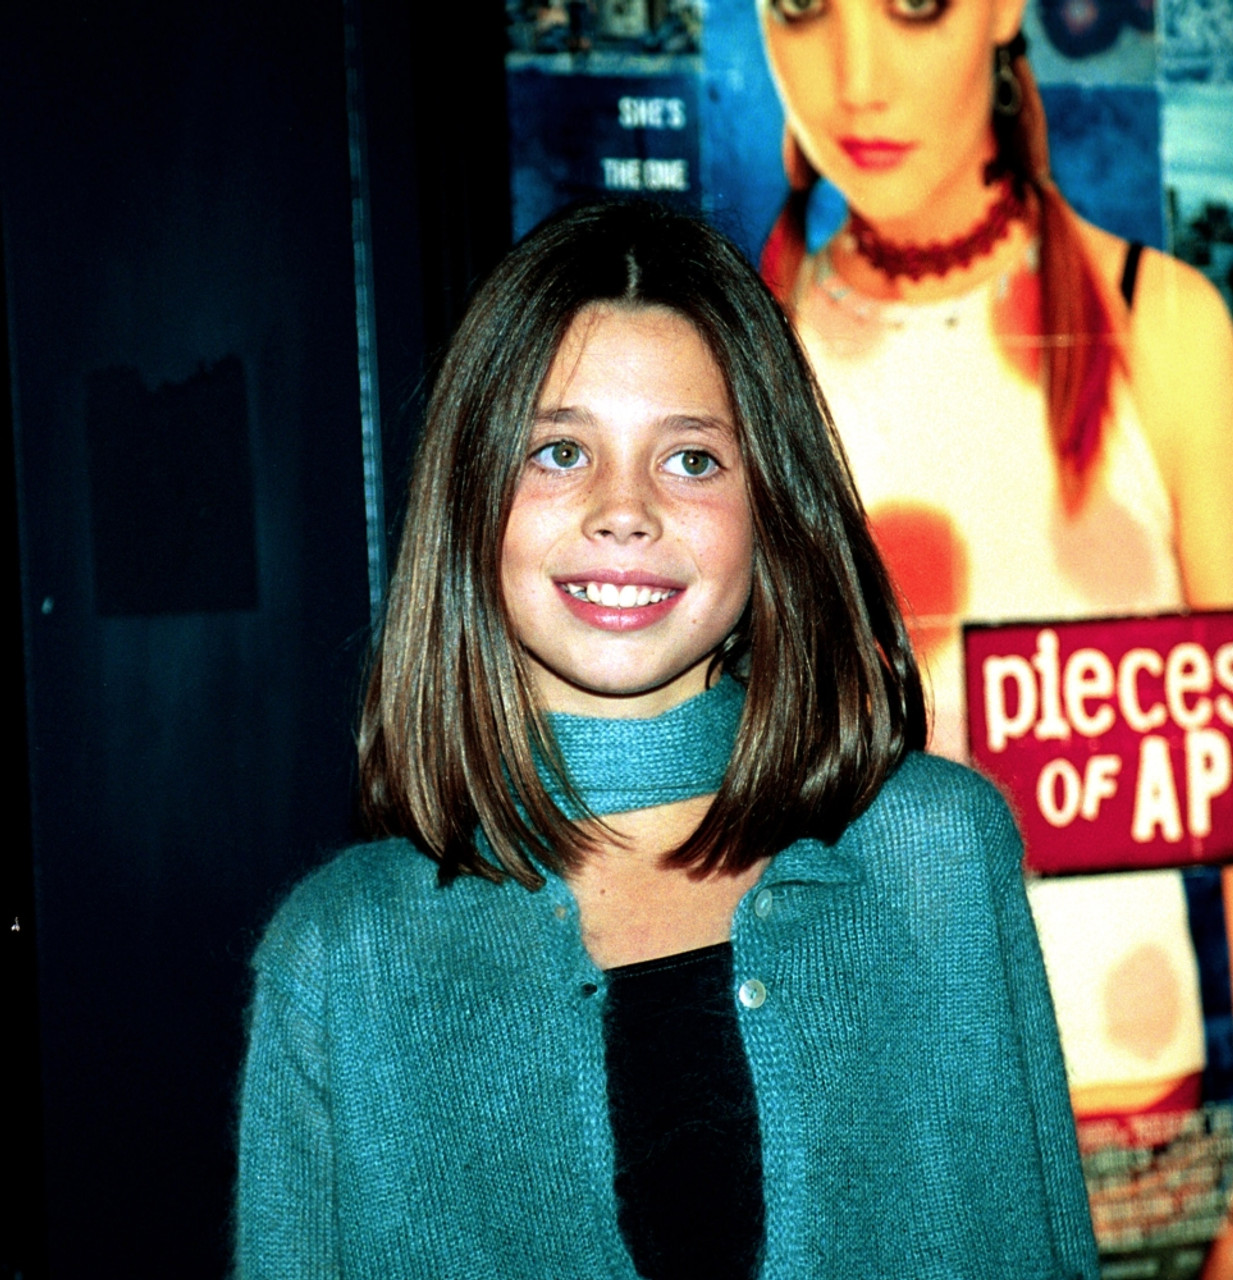 Katie Holmes At Premiere Of Pieces Of April, Ny 1082003, By Janet Mayer  Celebrity - Item # VAREVCPCDKAHOJM001 - Posterazzi